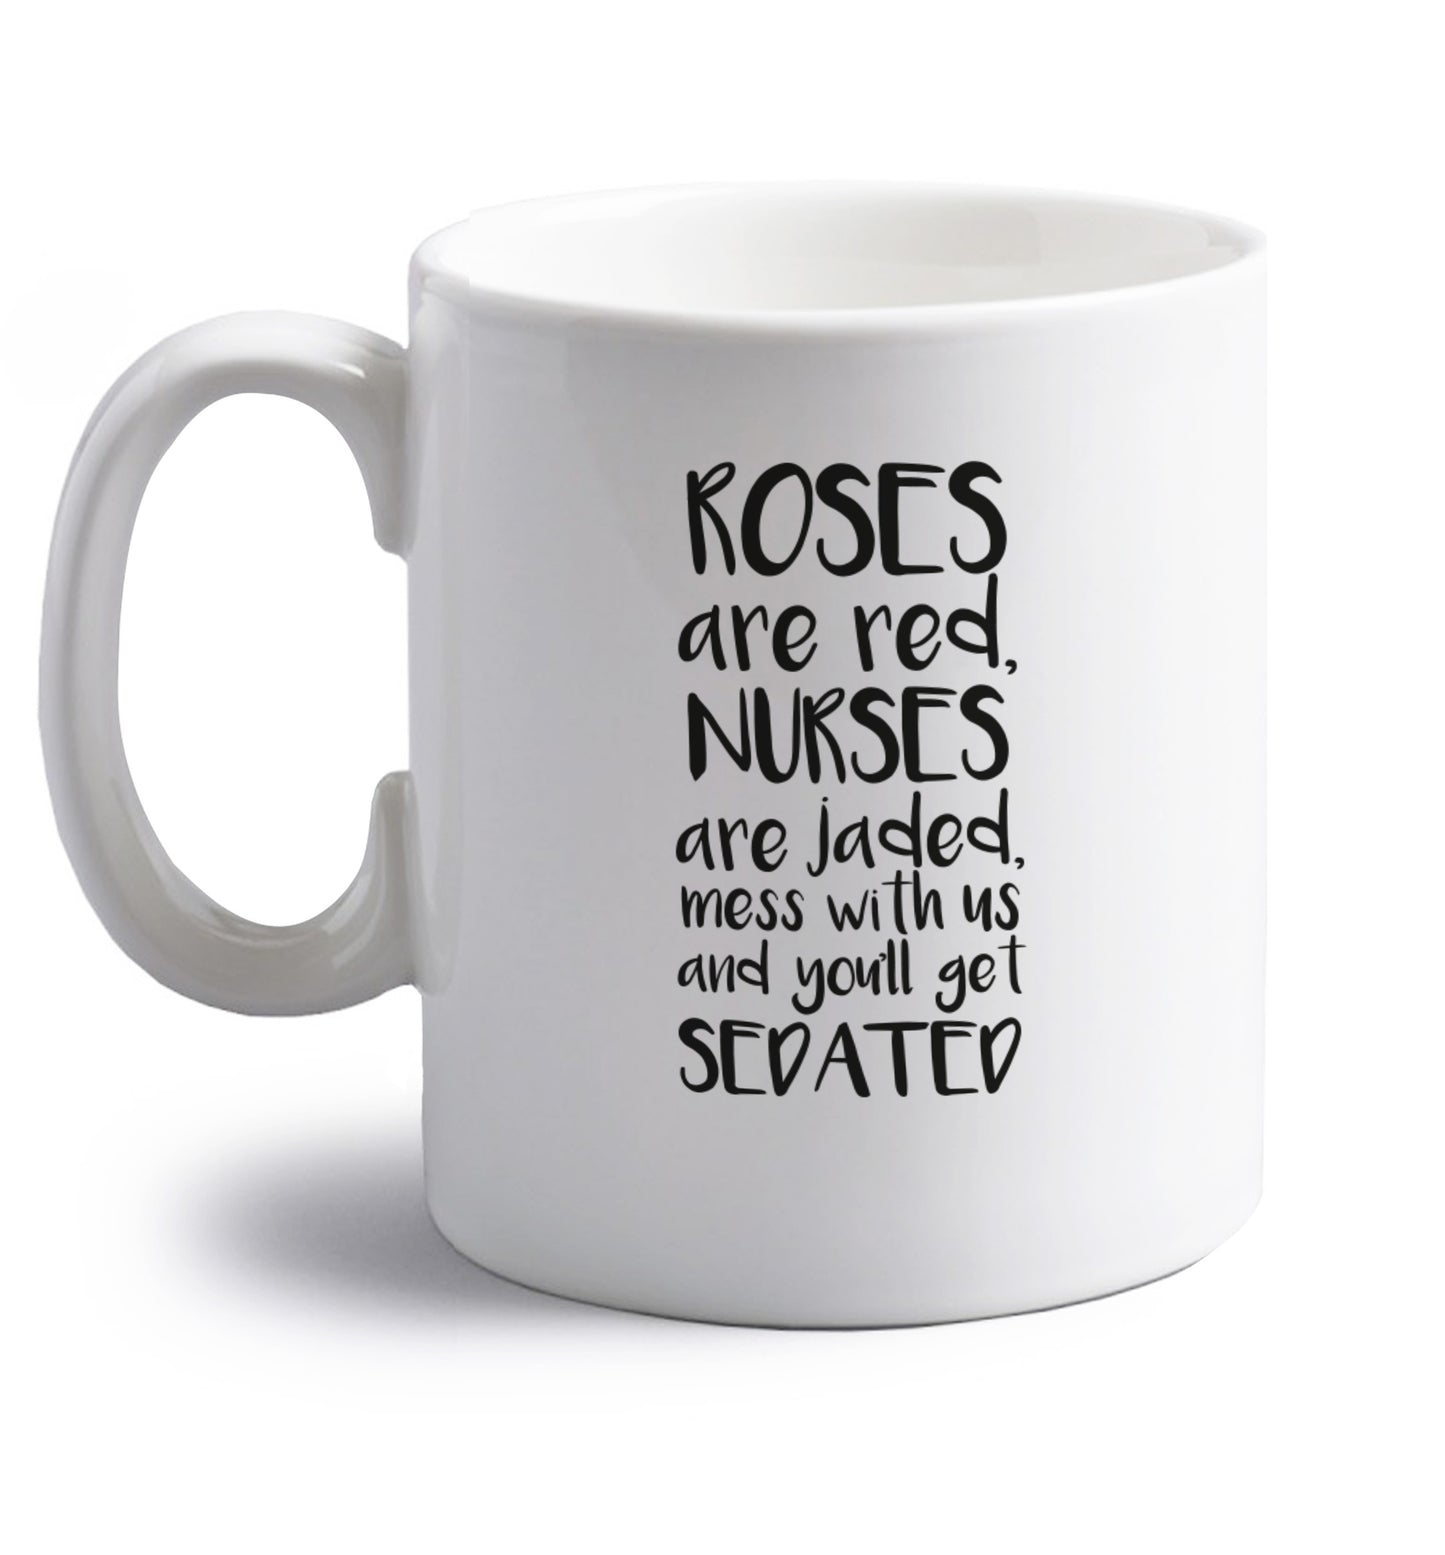 Roses are red, nurses are jaded, mess with us and you'll get sedated right handed white ceramic mug 